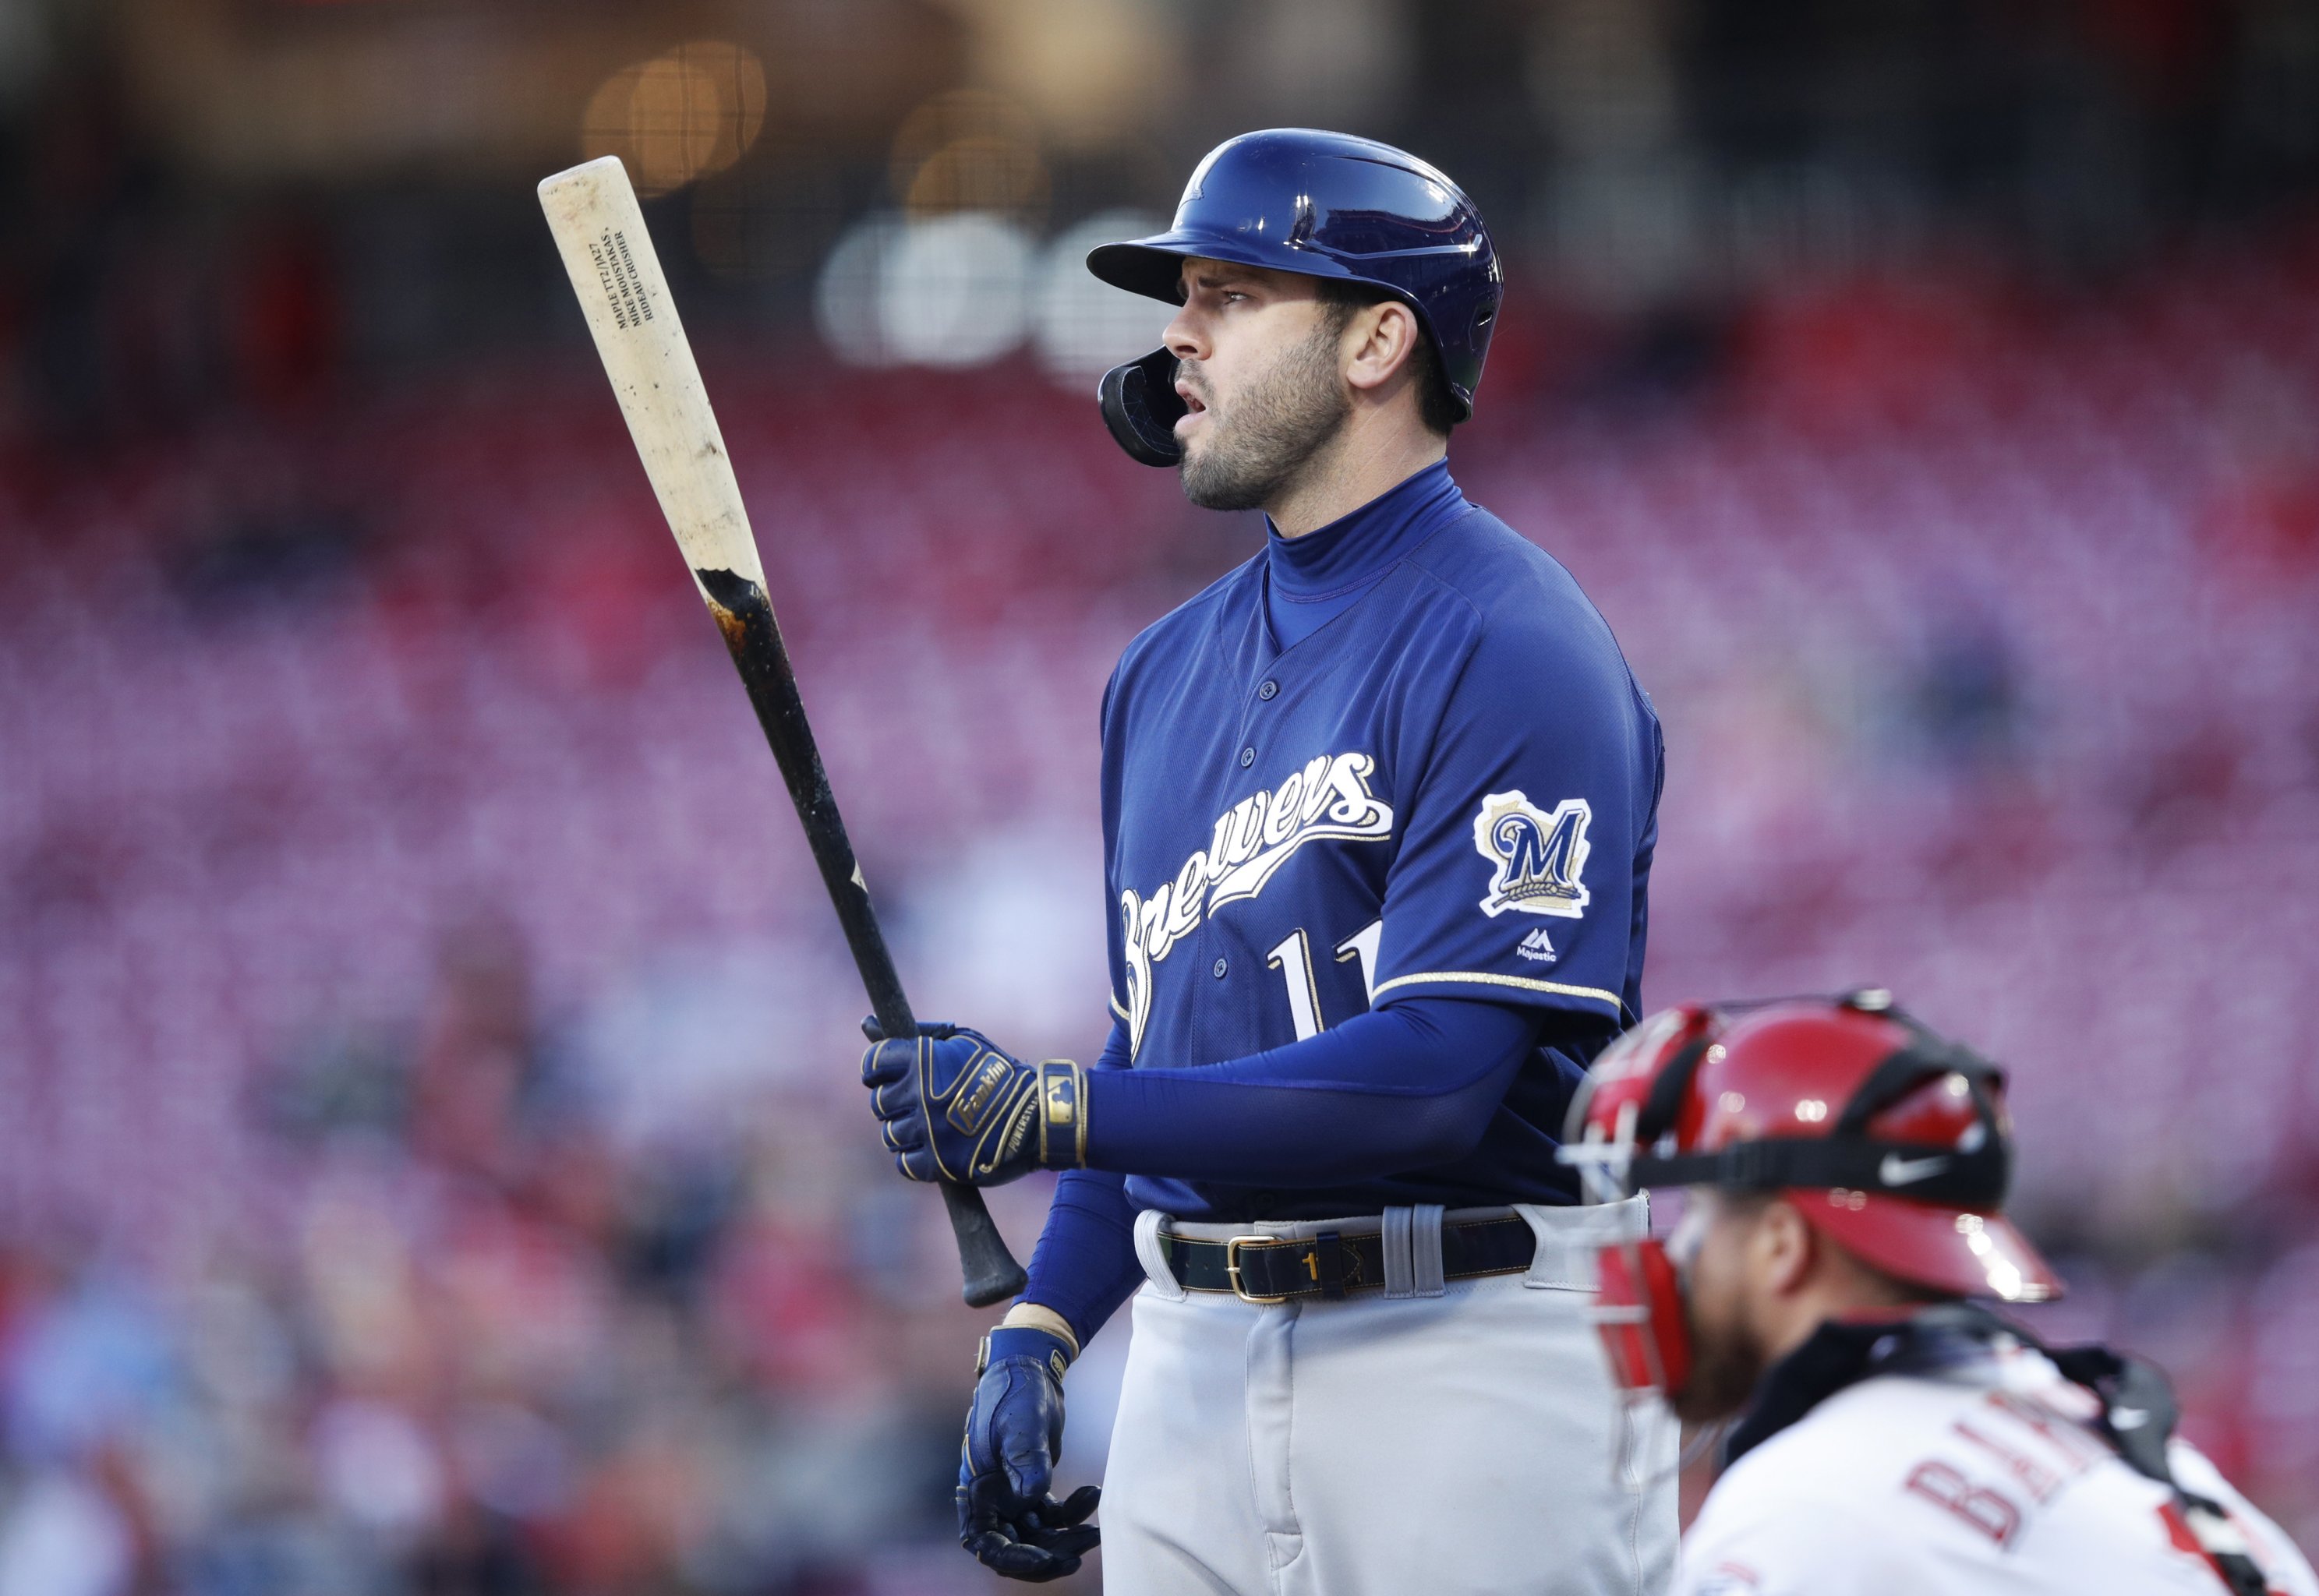 Nine Brewers become free agents, including Moustakas and Grandal